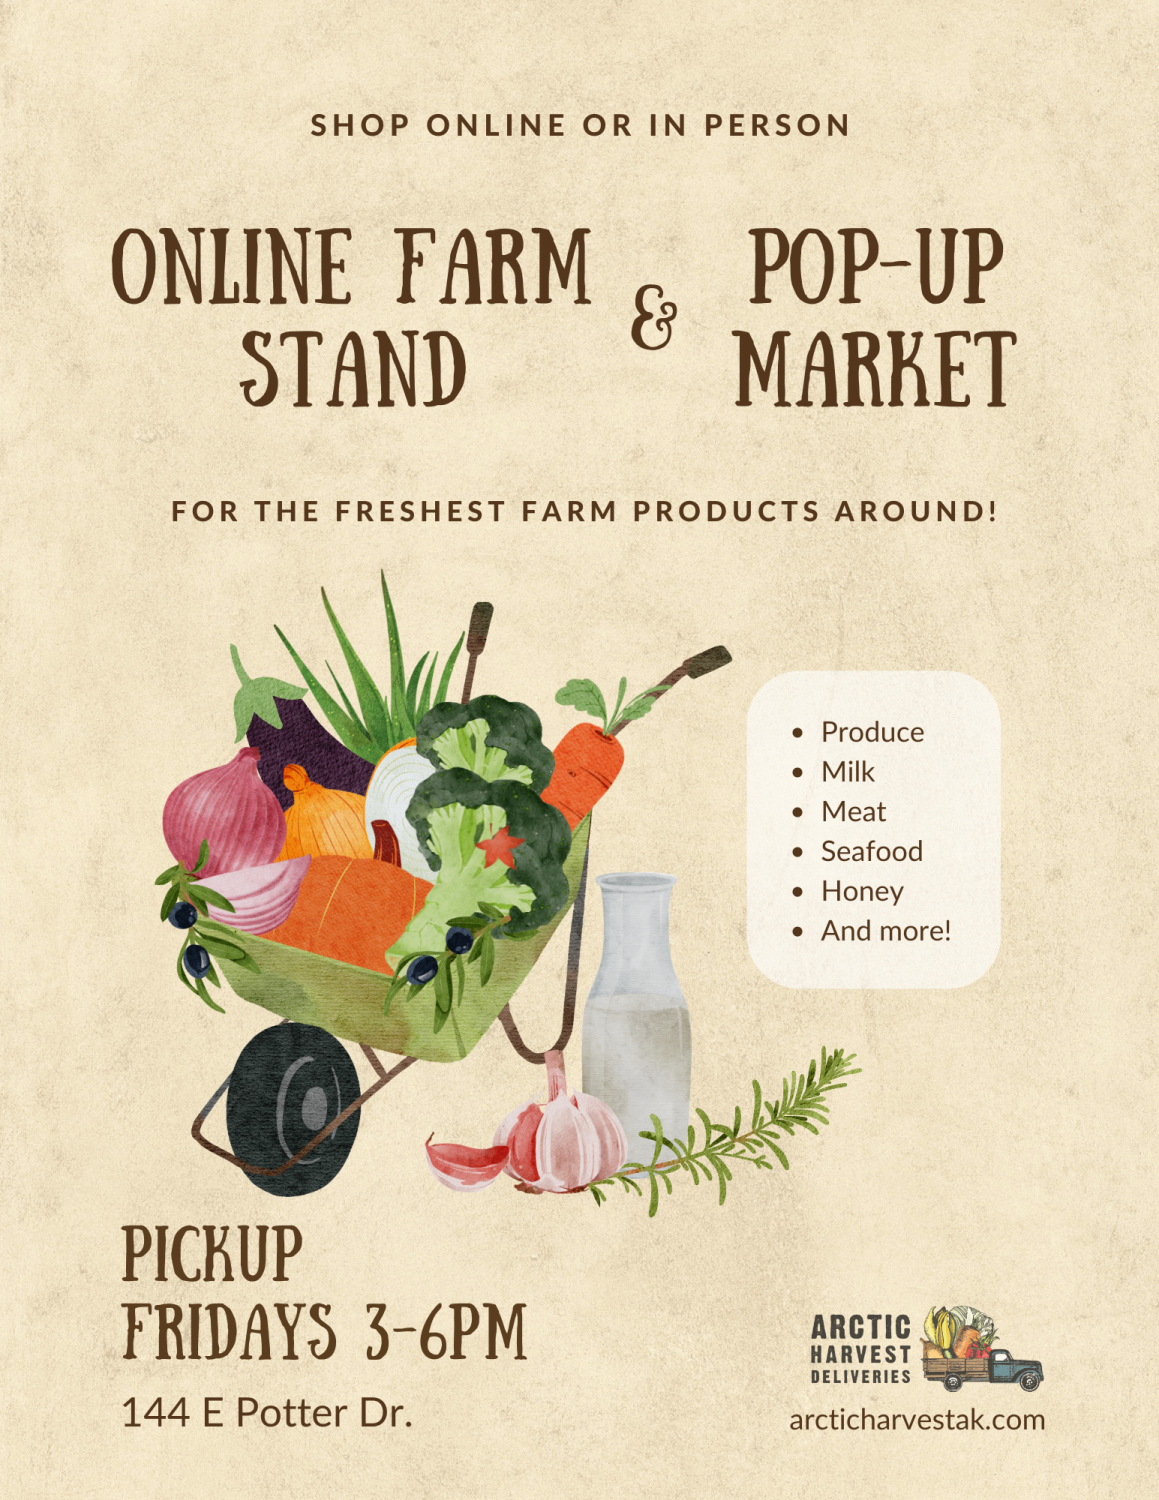 Previous Happening: Fall Farm Stand + Pop Up Market!